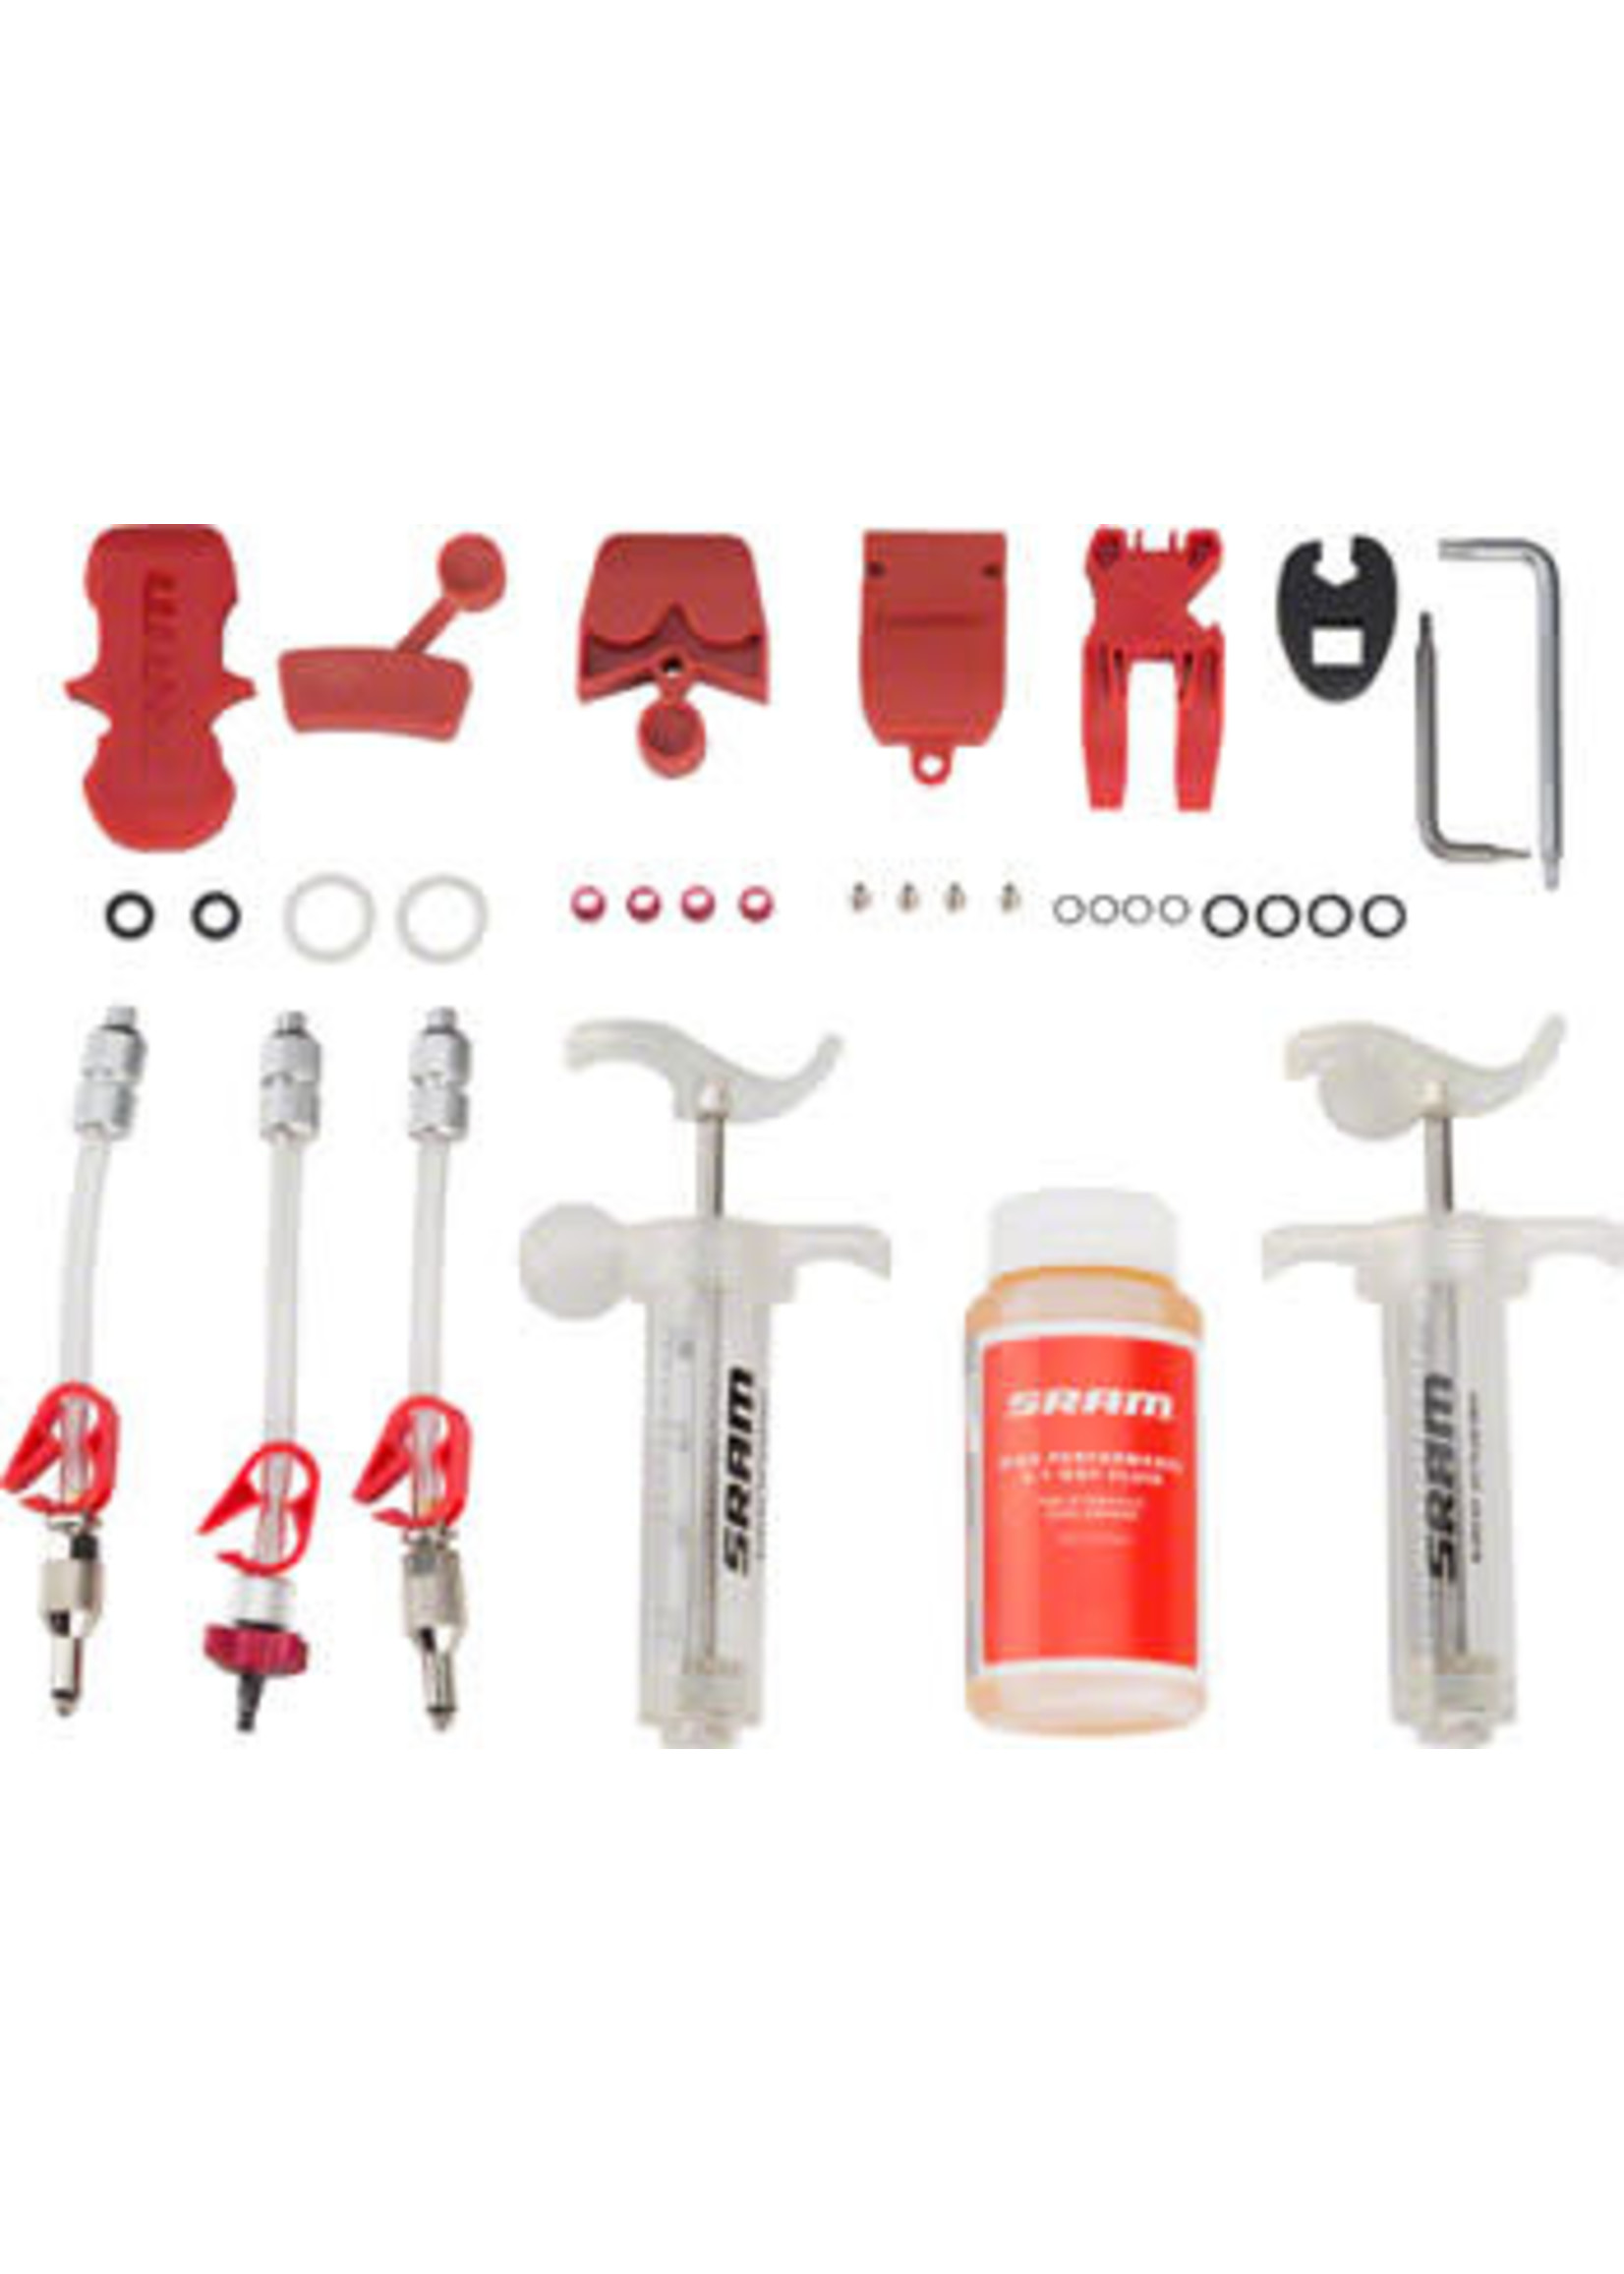 Sram SRAM Pro Disc Brake Bleed Kit - For SRAM X0, XX, Guide, Level, Code, HydroR, and G2, with DOT Fluid